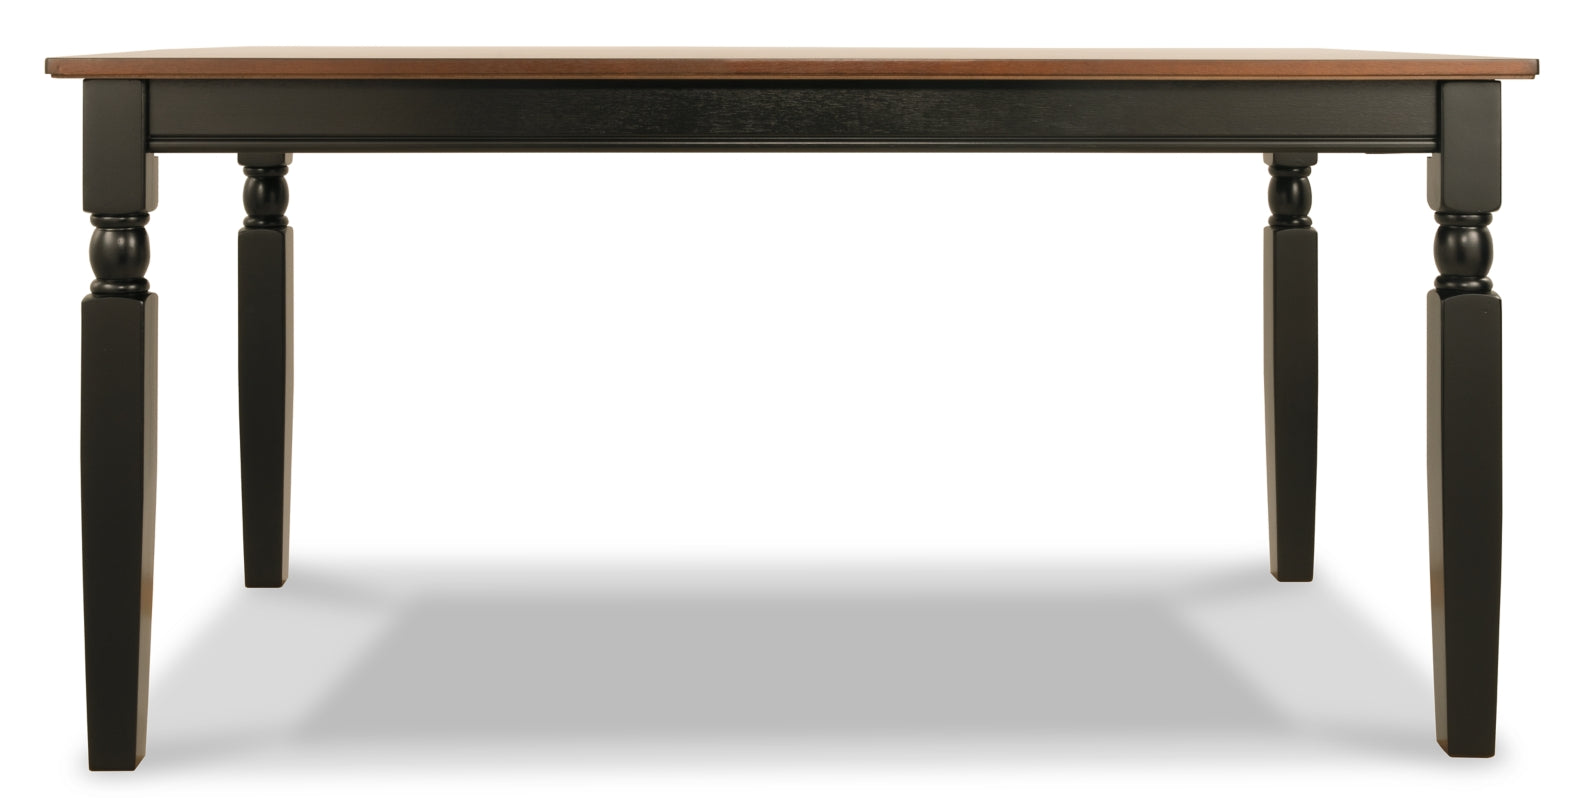 Owingsville Dining Table - furniture place usa